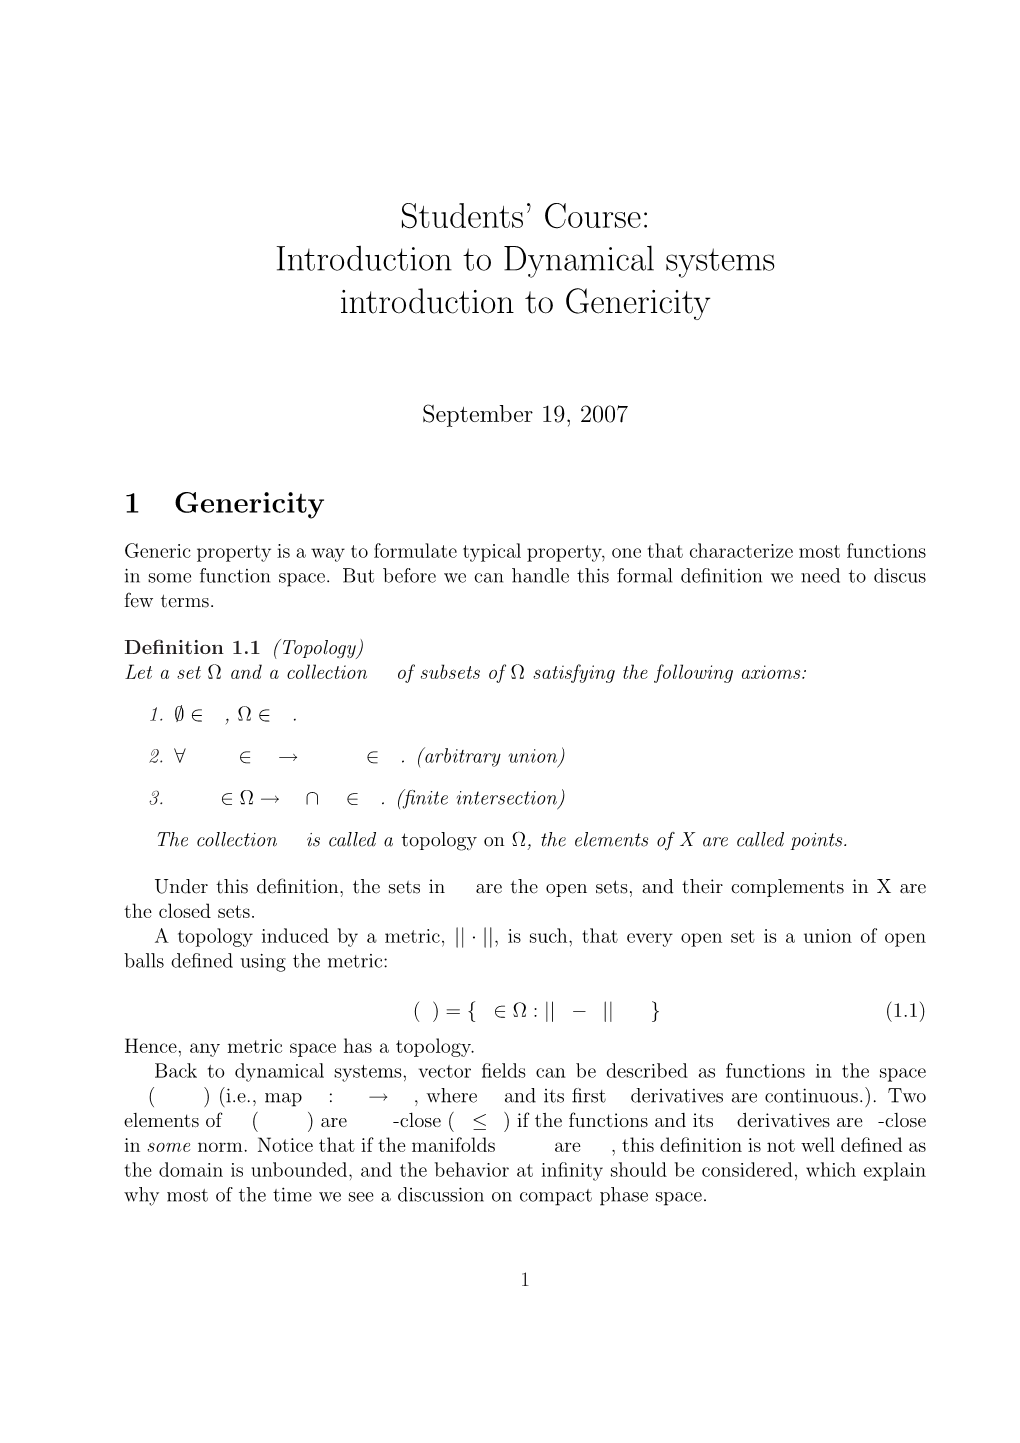 Introduction to Dynamical Systems Introduction to Genericity